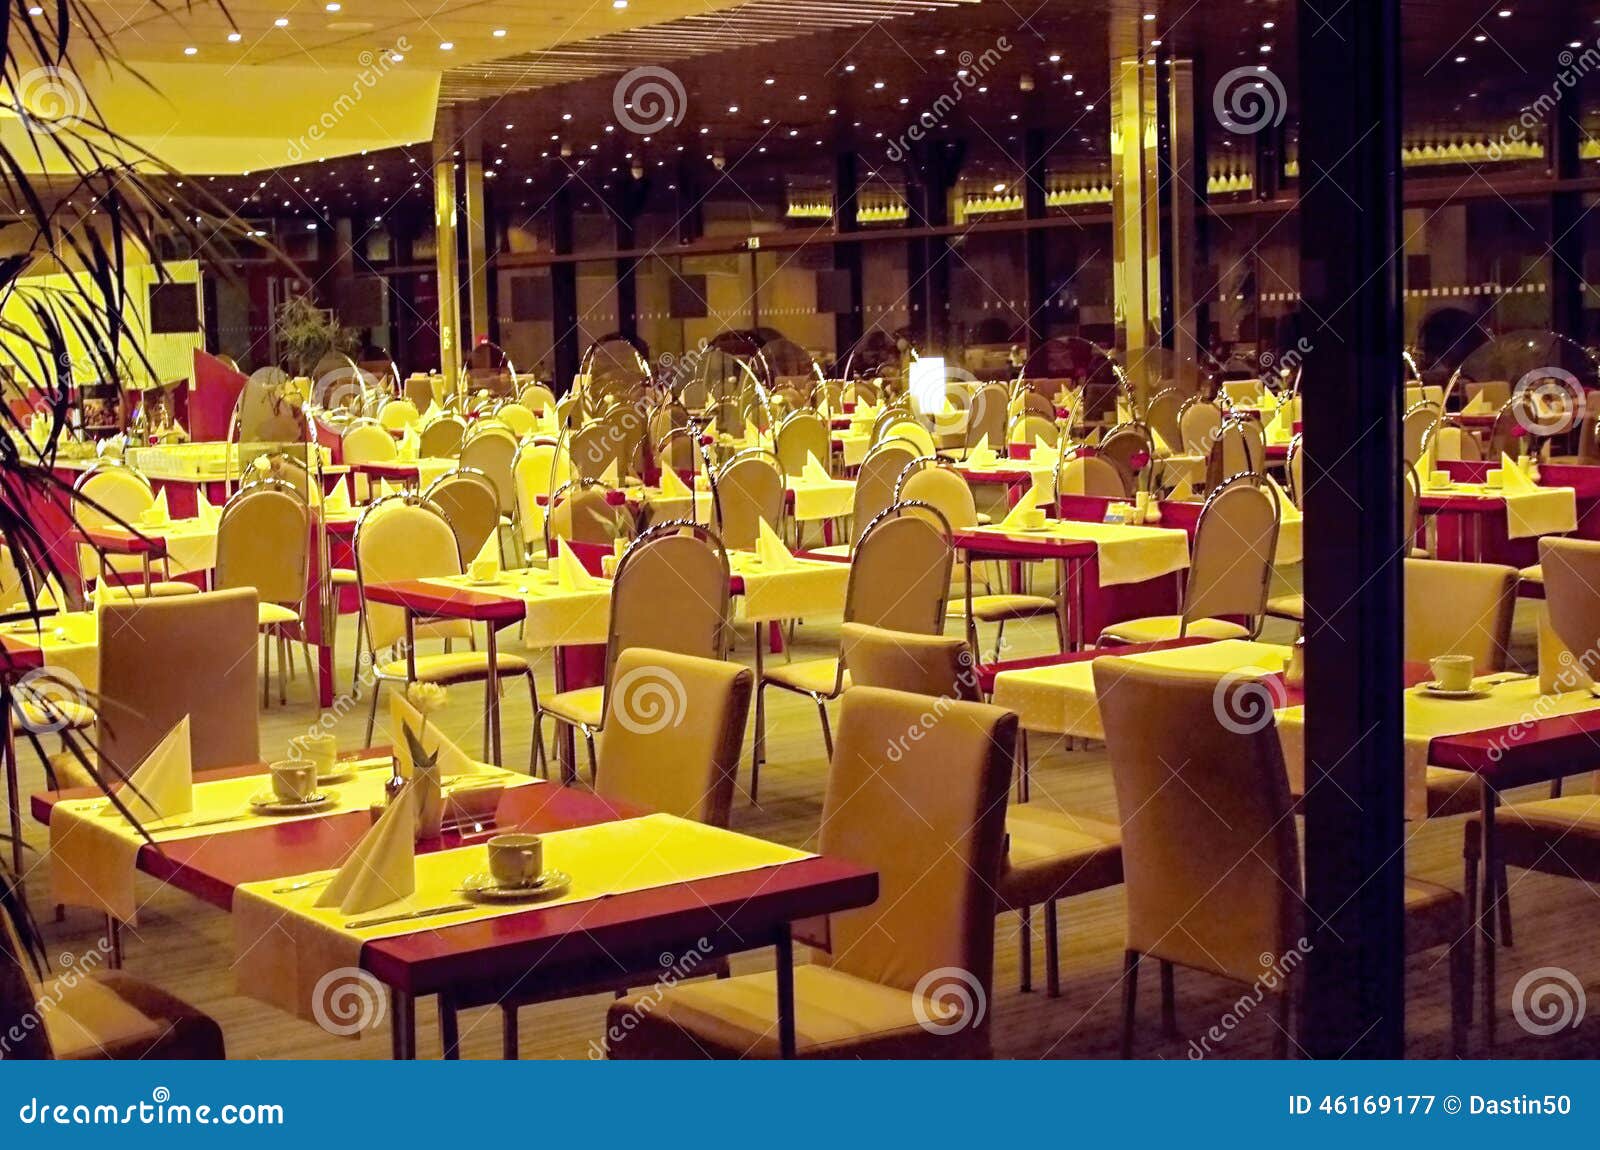 Interior of a Modern Hotel Restaurants Stock Image - Image of hotel ...